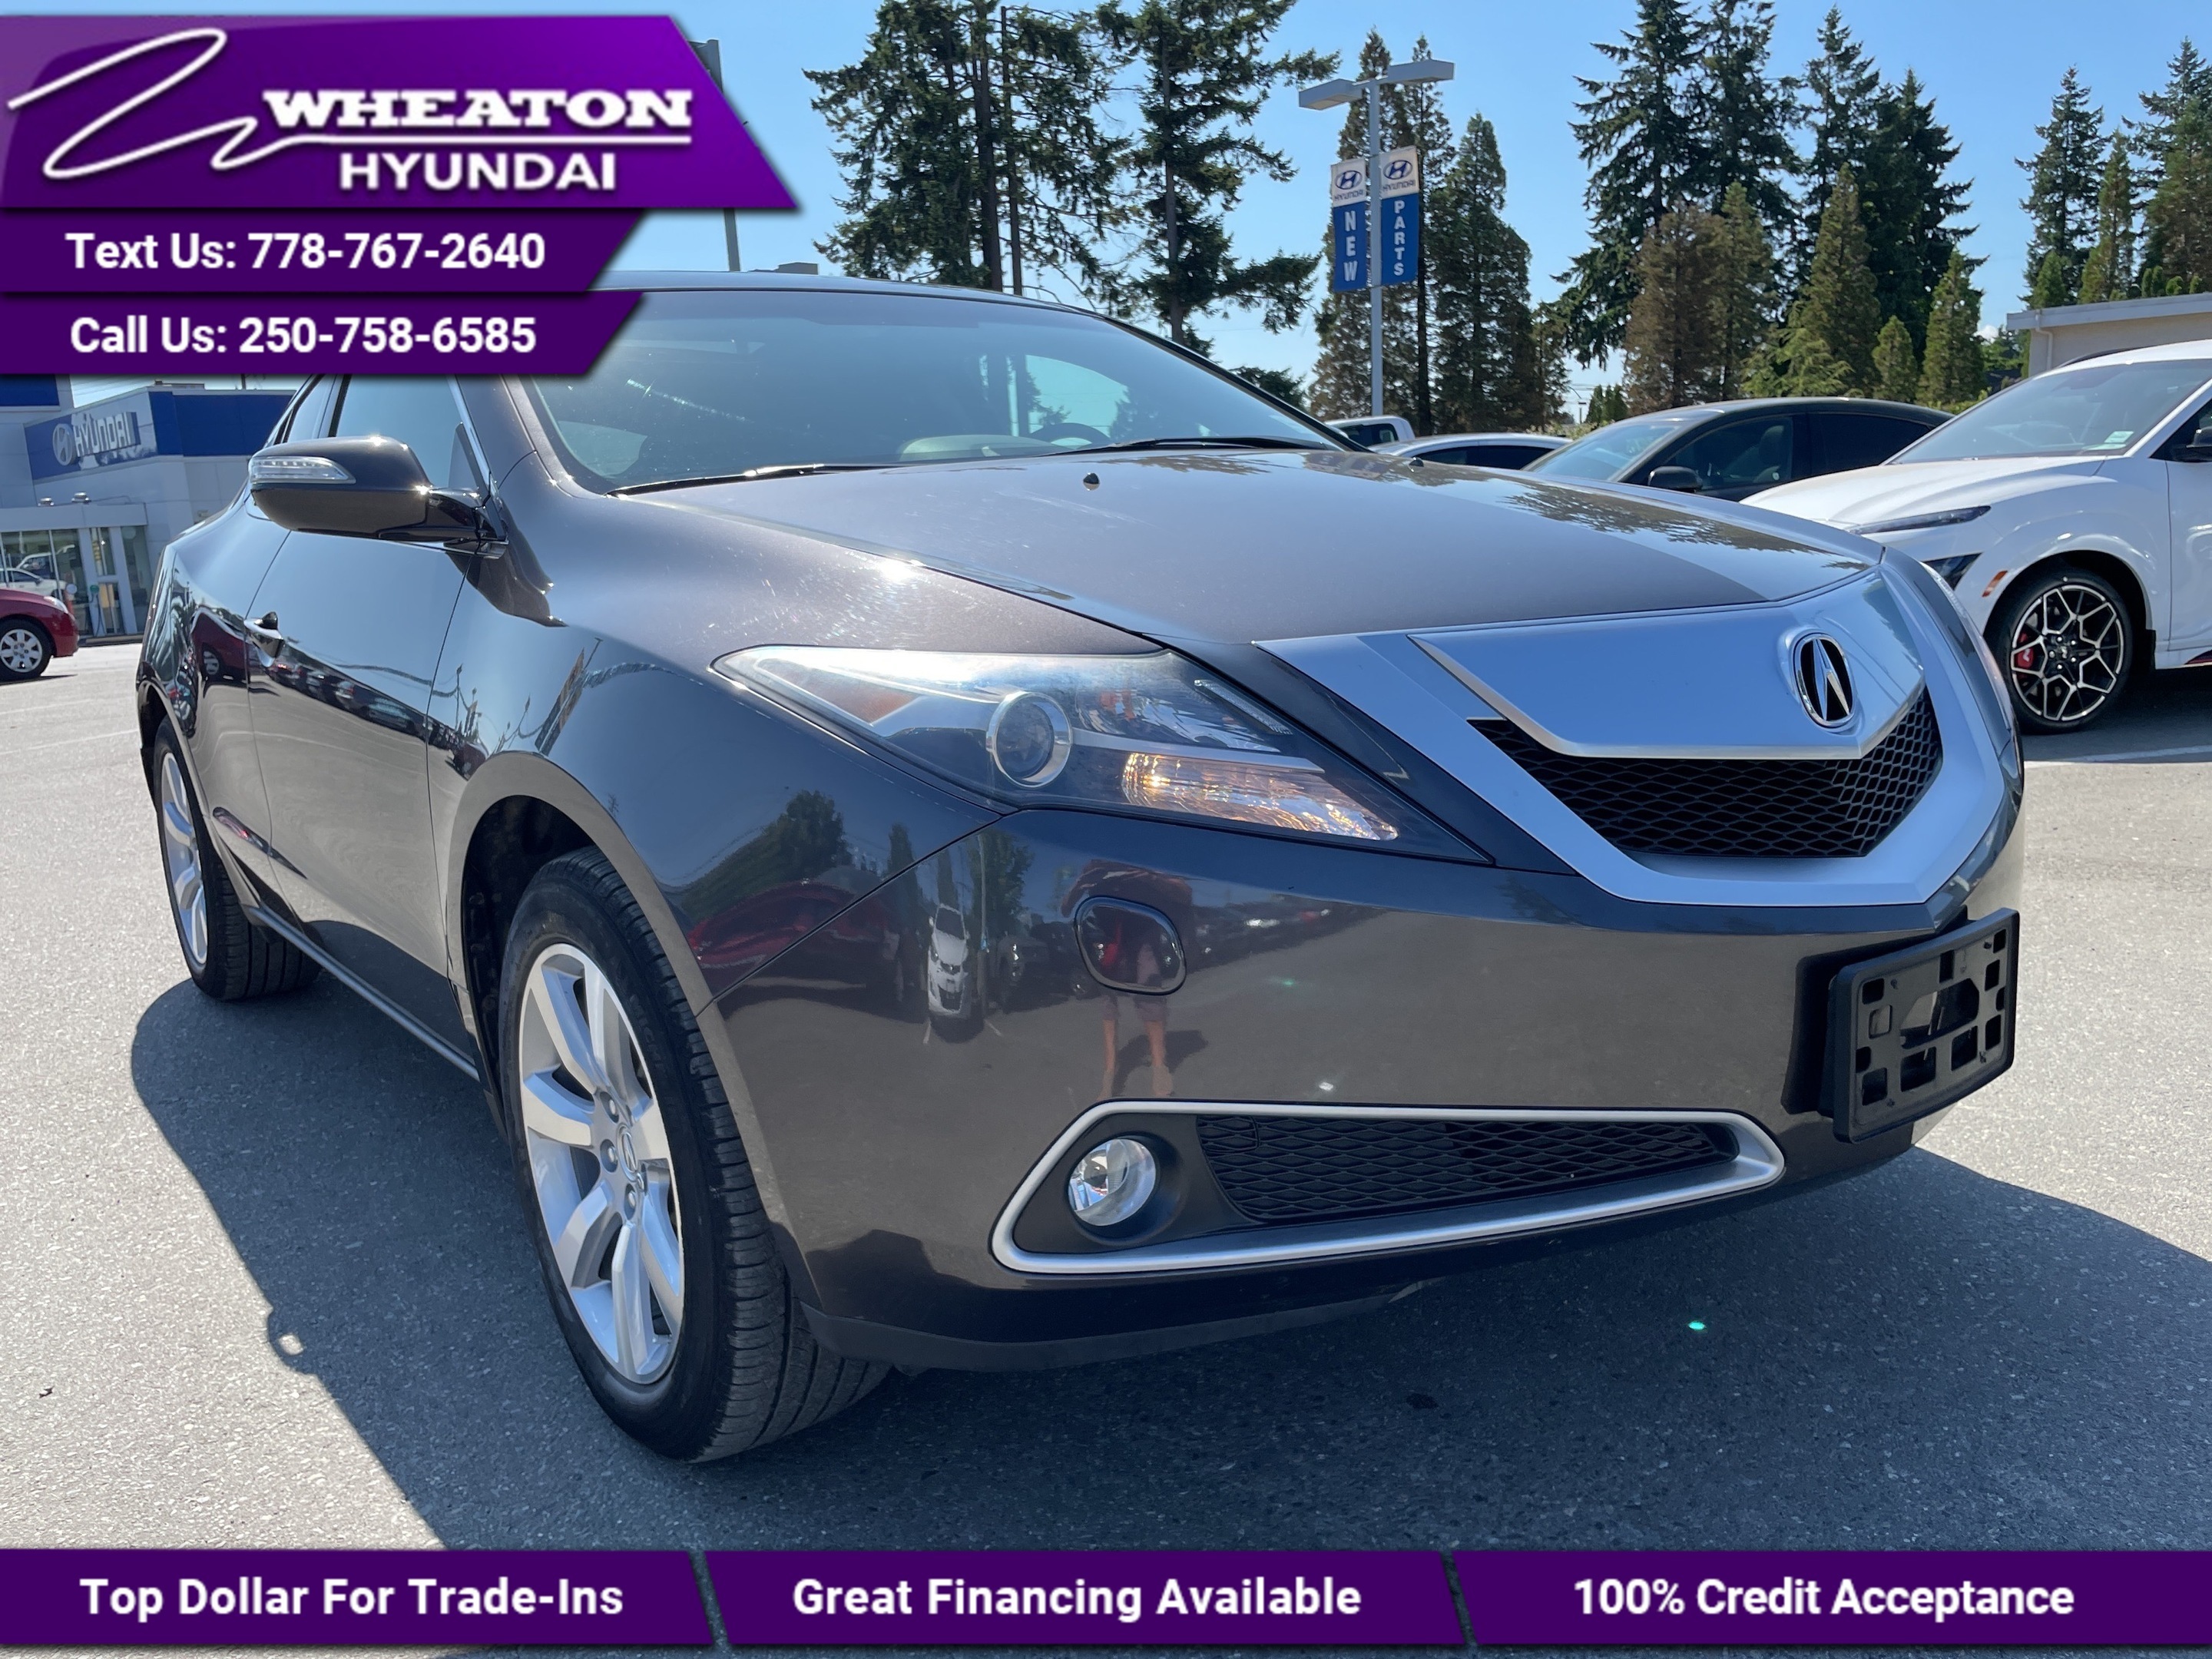 2010 Acura ZDX Technology Package, Trade in, Super Low Kms, Navig